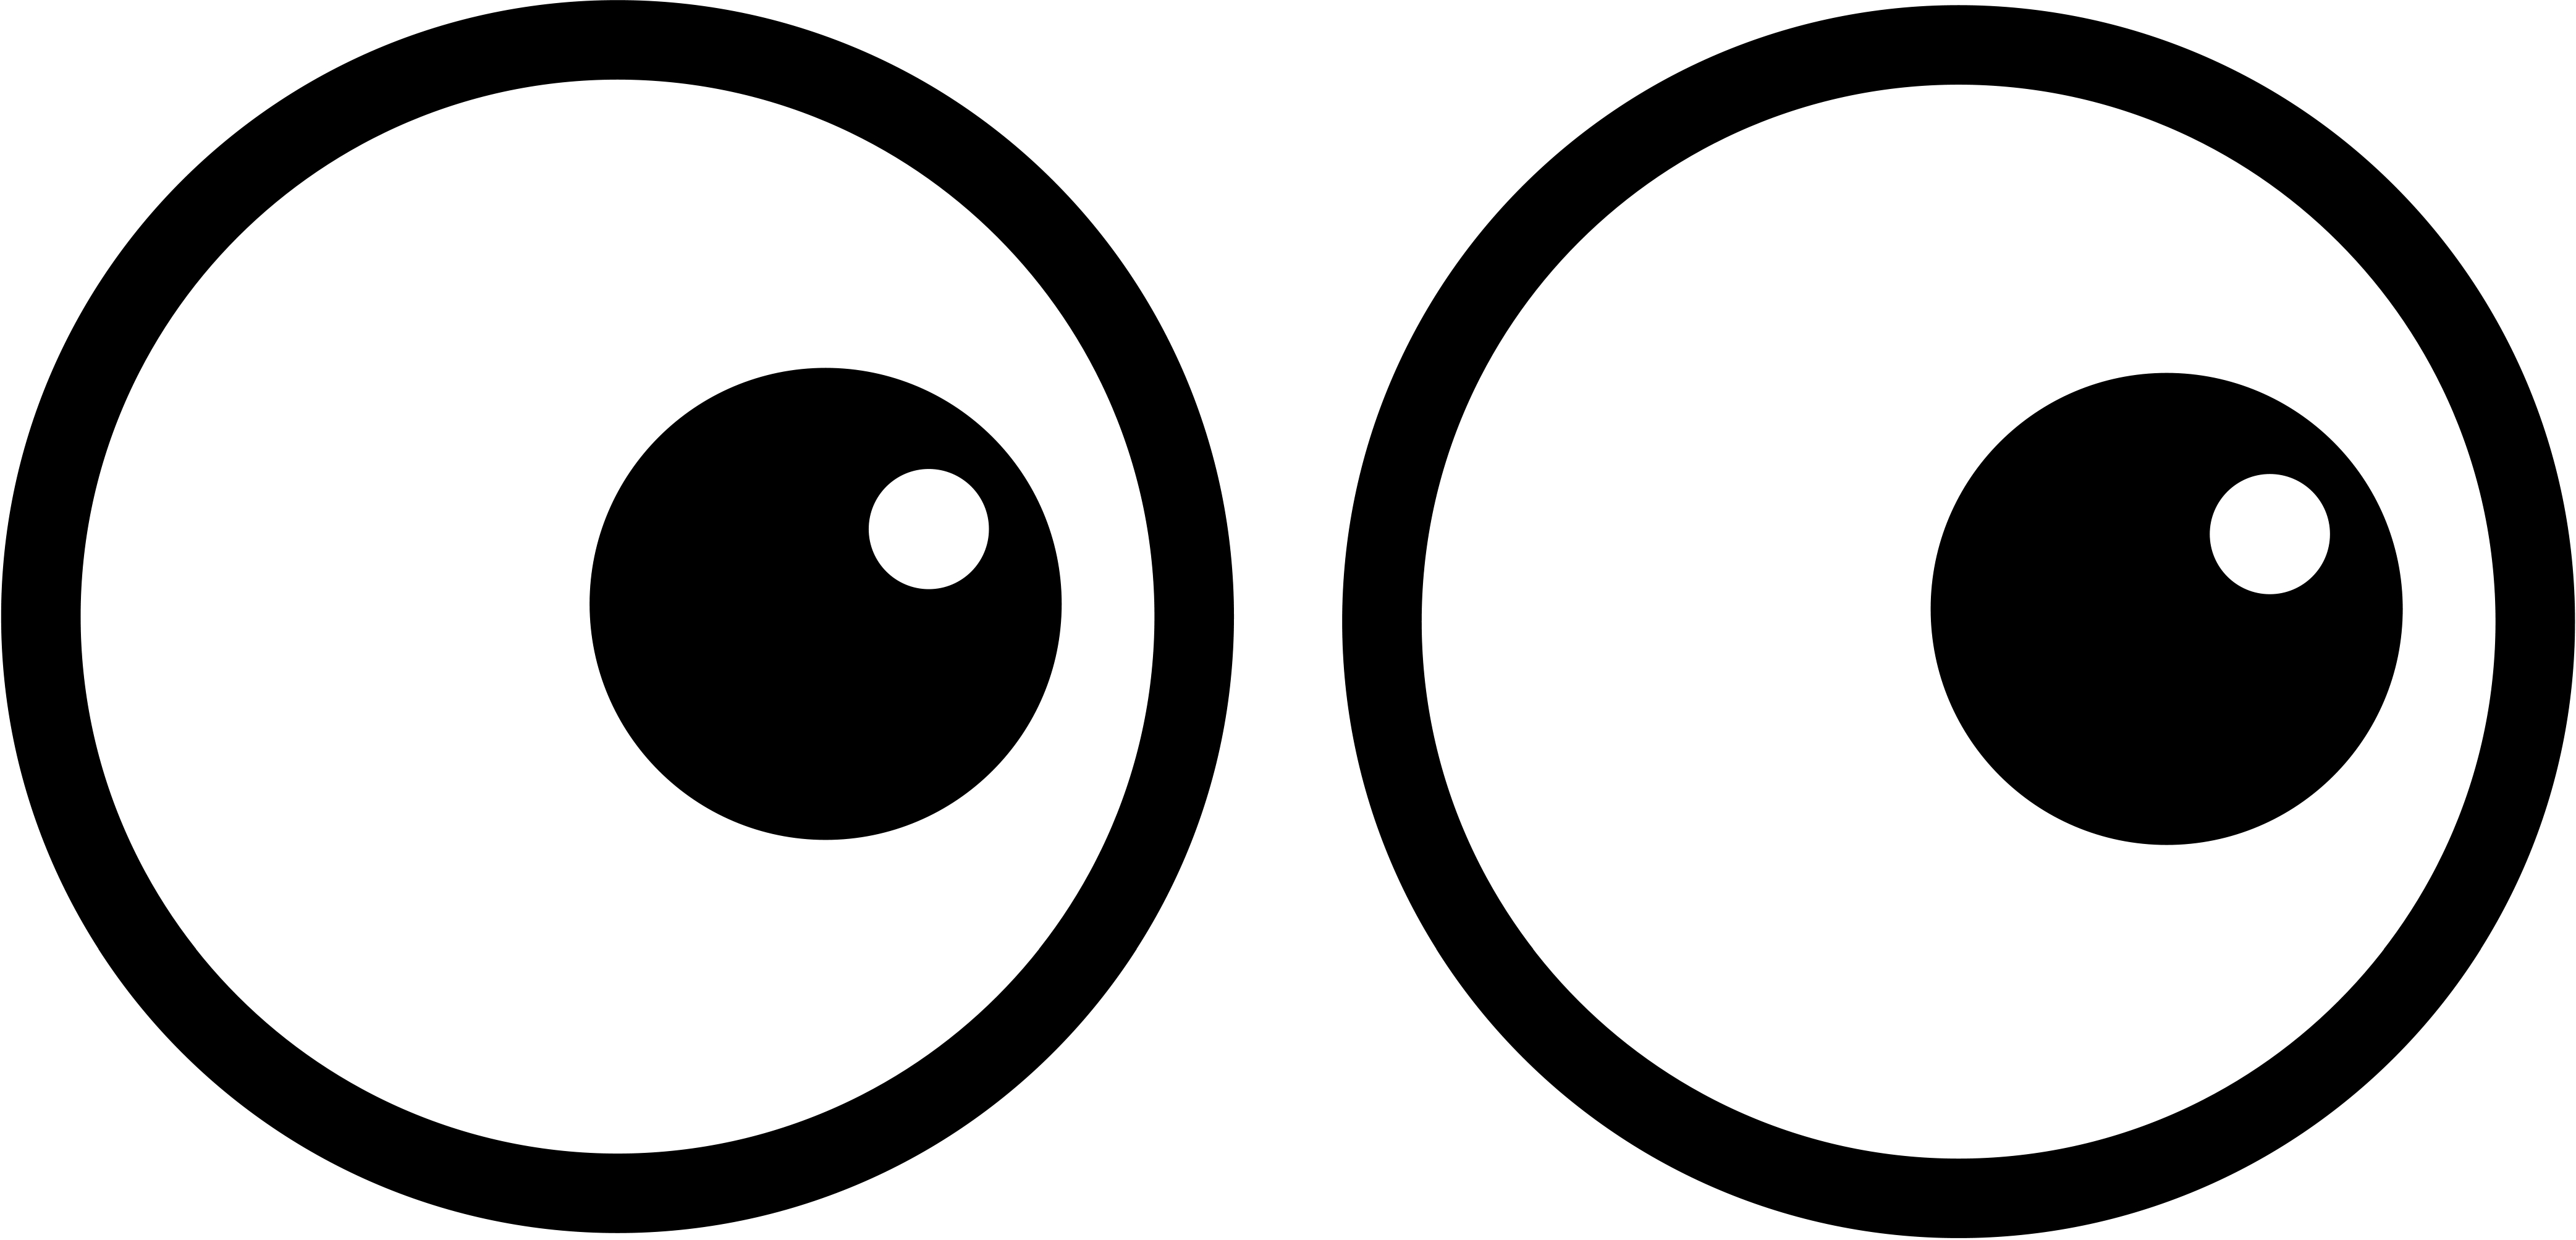 Pair of eyes clipart black and white